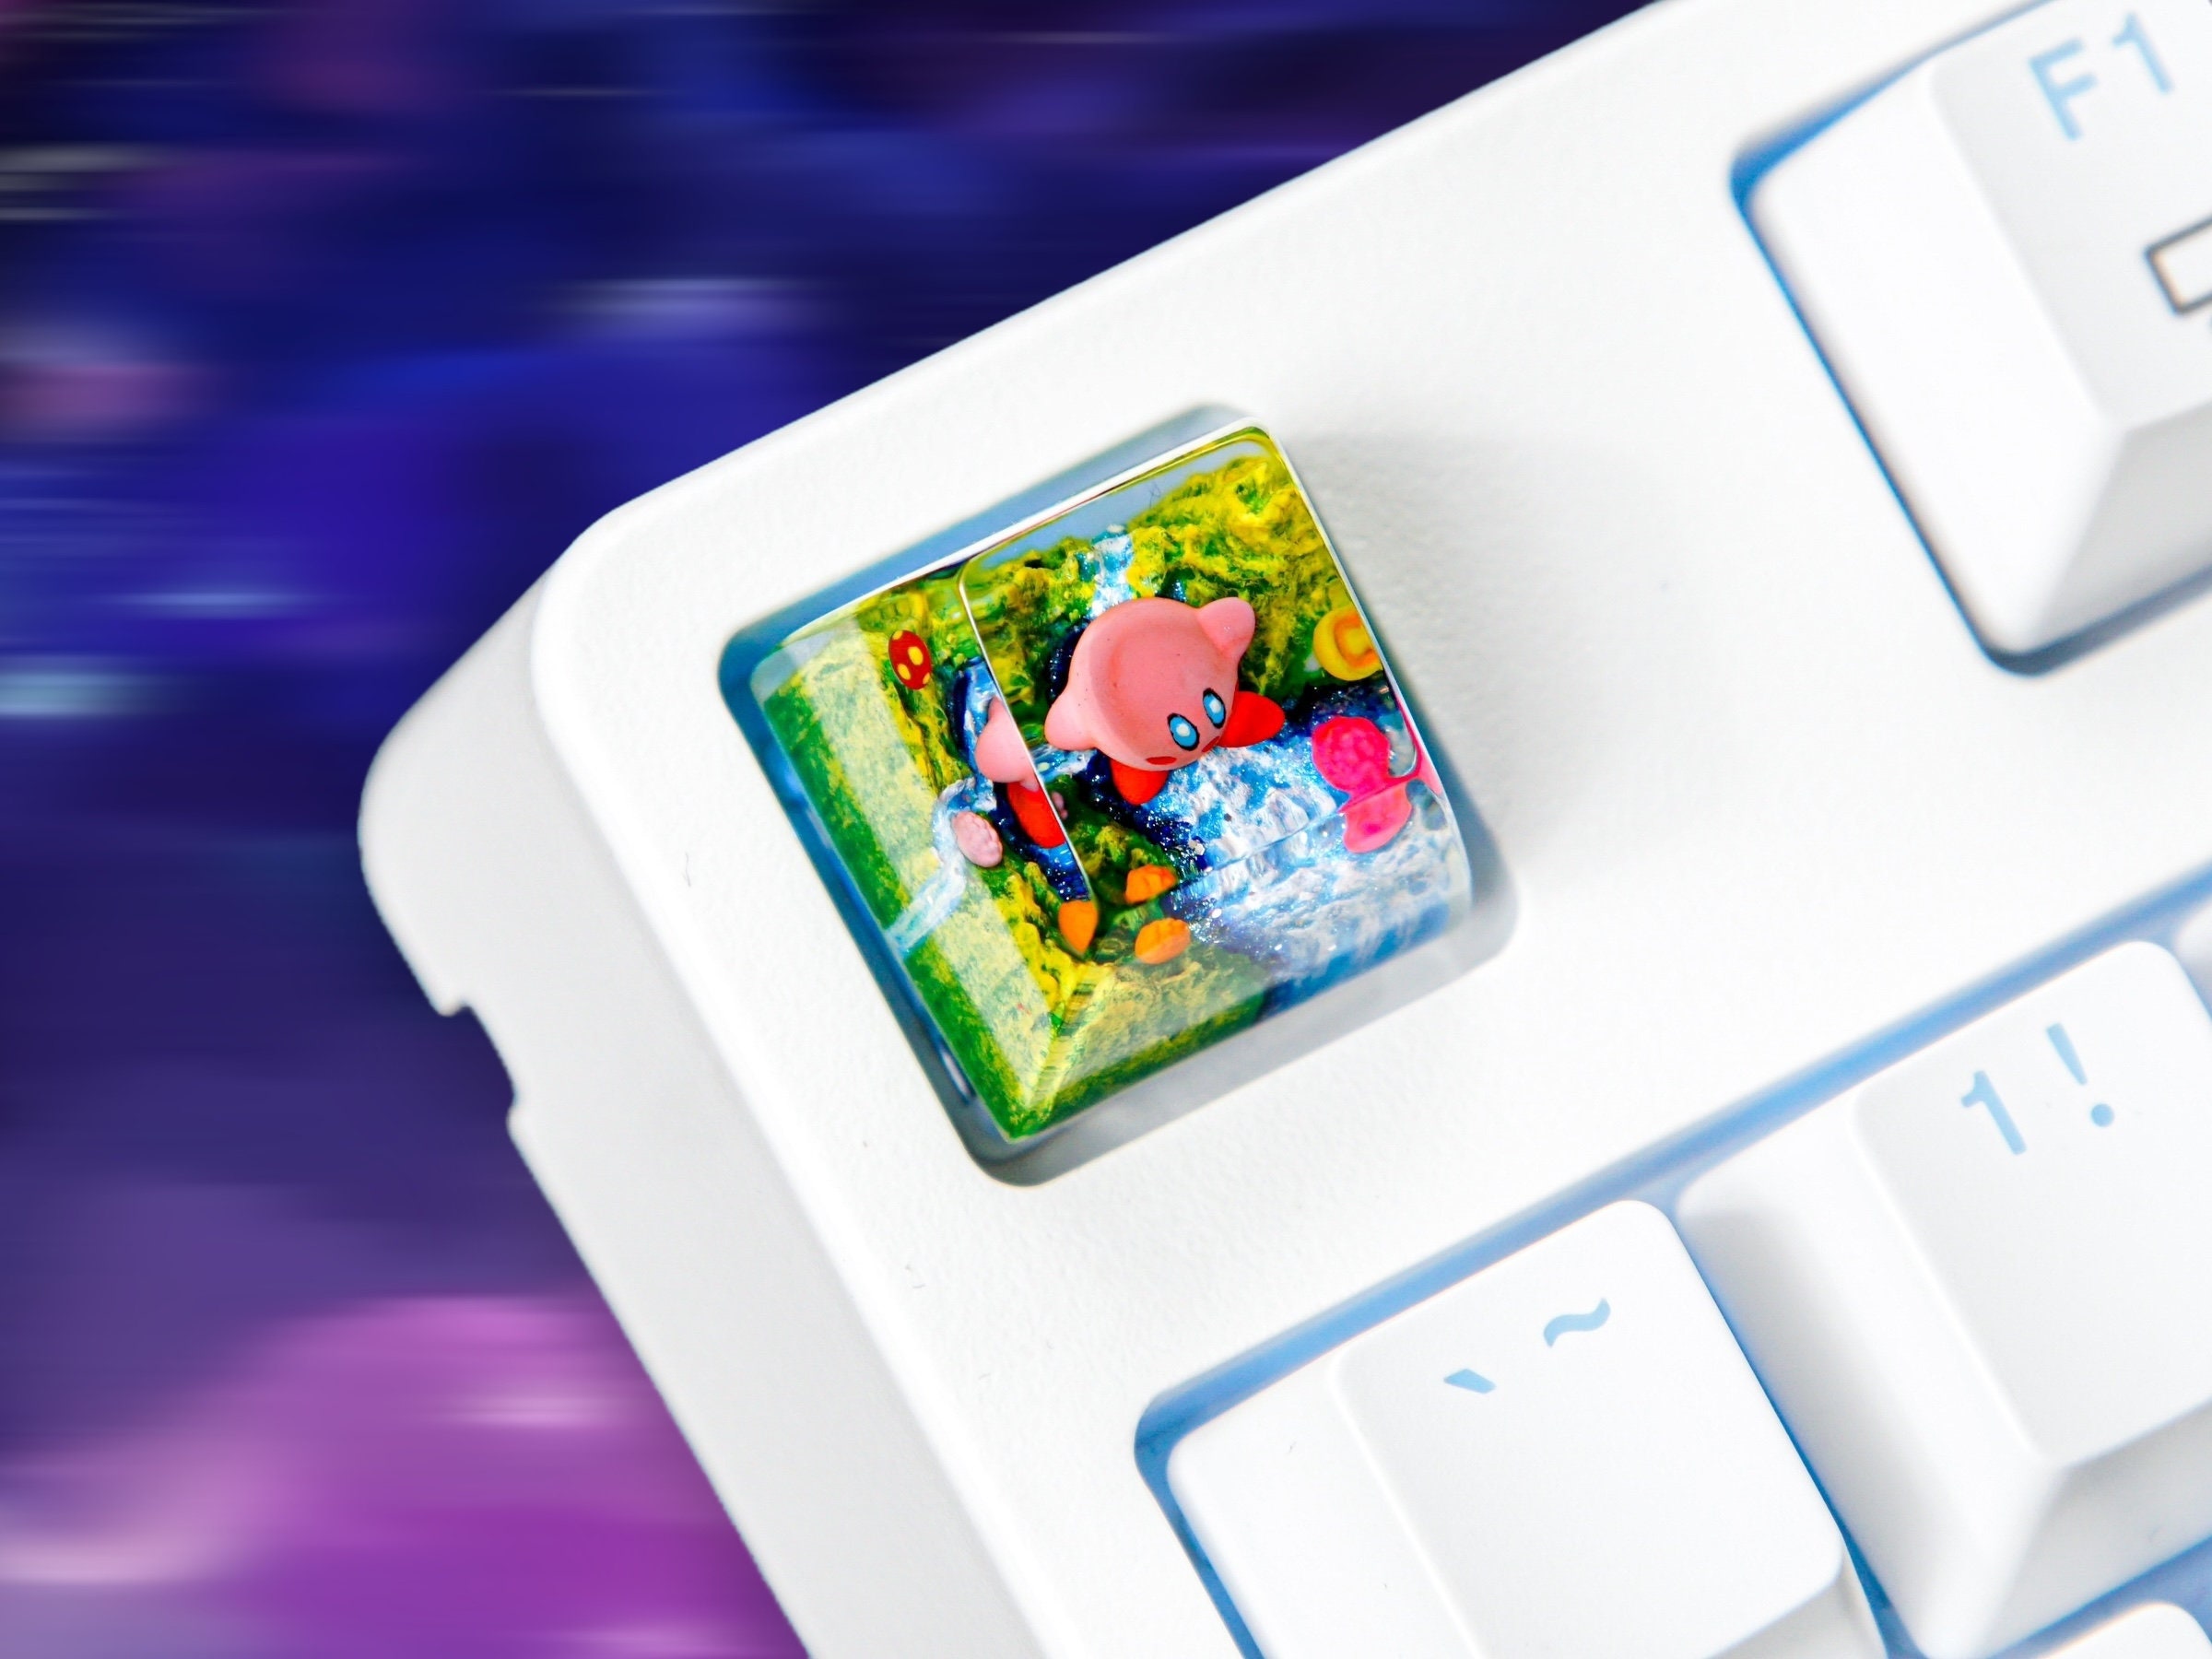 Kirby Keycap, Gaming Keycap, Artisan Keycap, Resin Keycap, Keycap for Cherry MX Switches Mechanical Keyboard, Gift for him